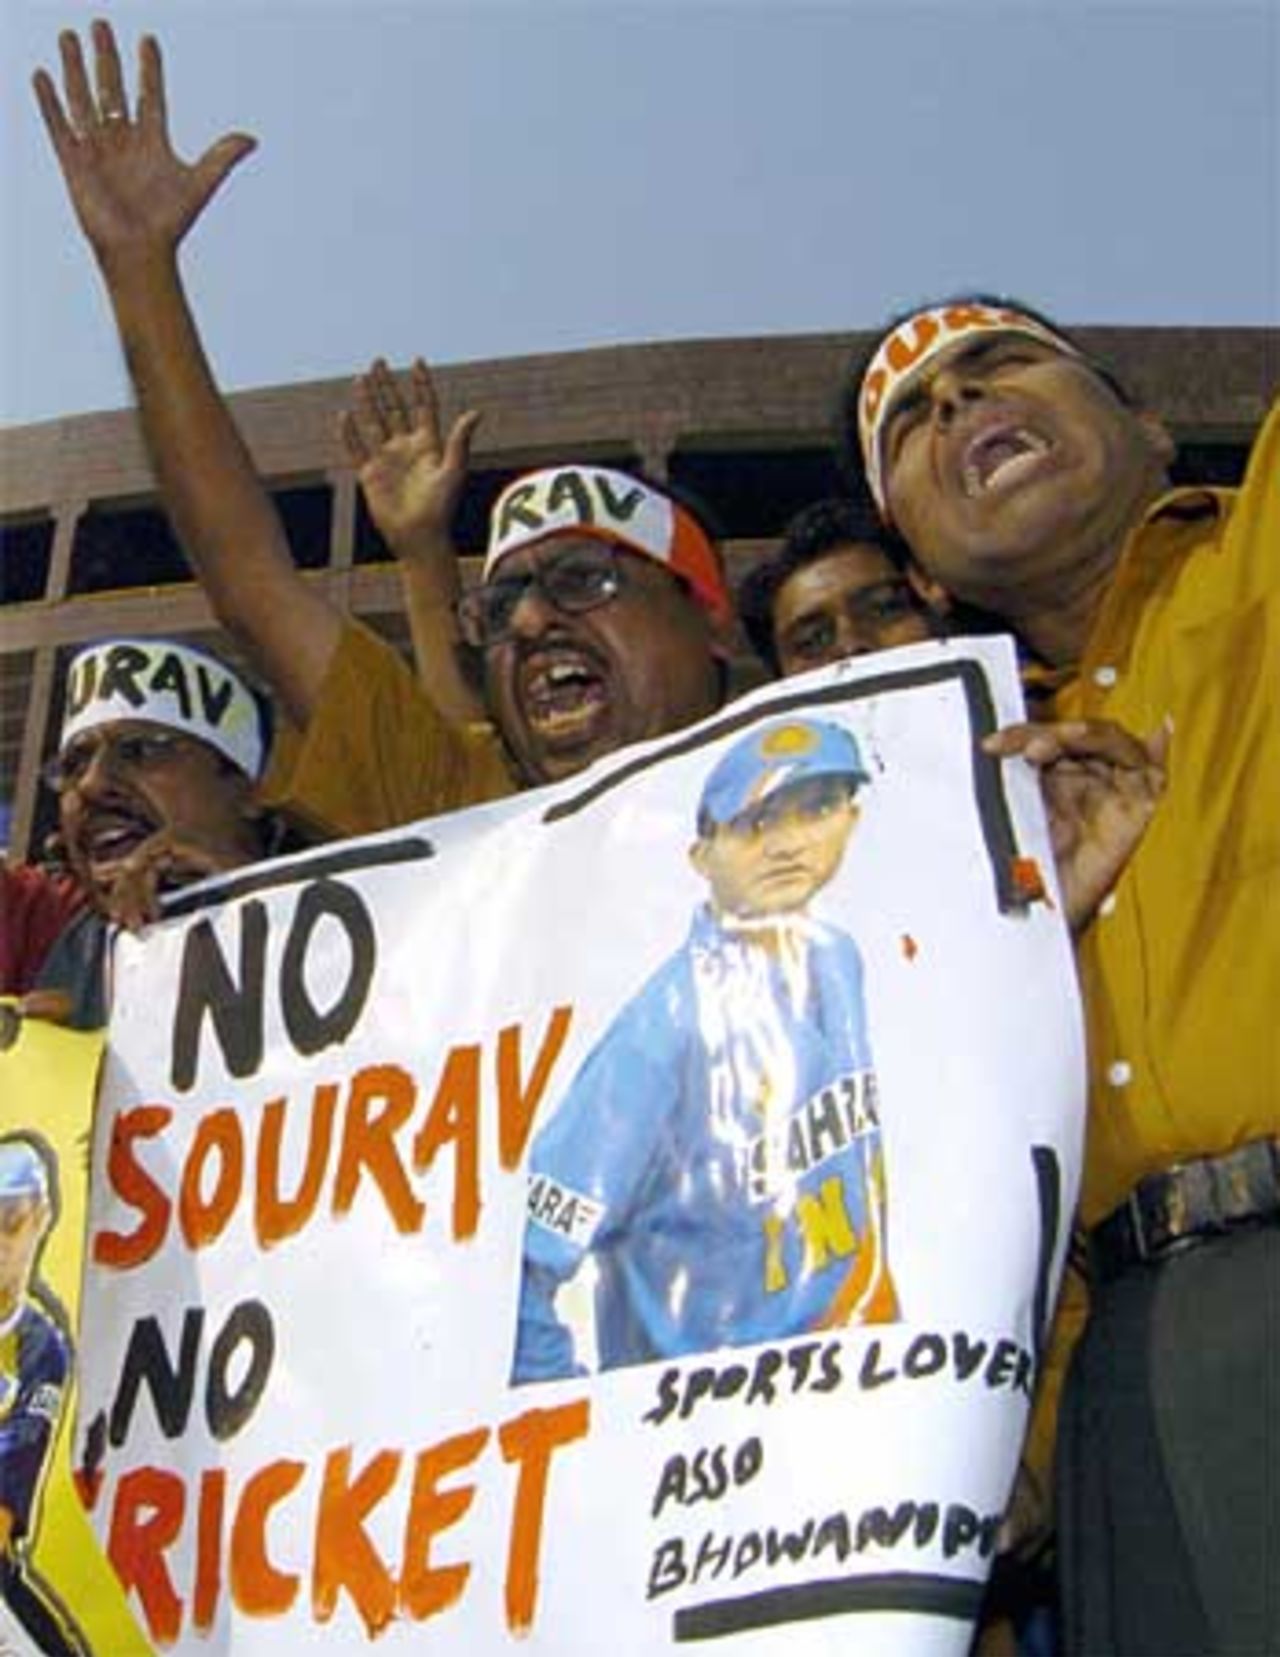 No Sourav, no cricket - that's the message of the Ganguly supporters who gathered outside Eden Gardens Cricket Stadium in Kolkata, 22 November 2005